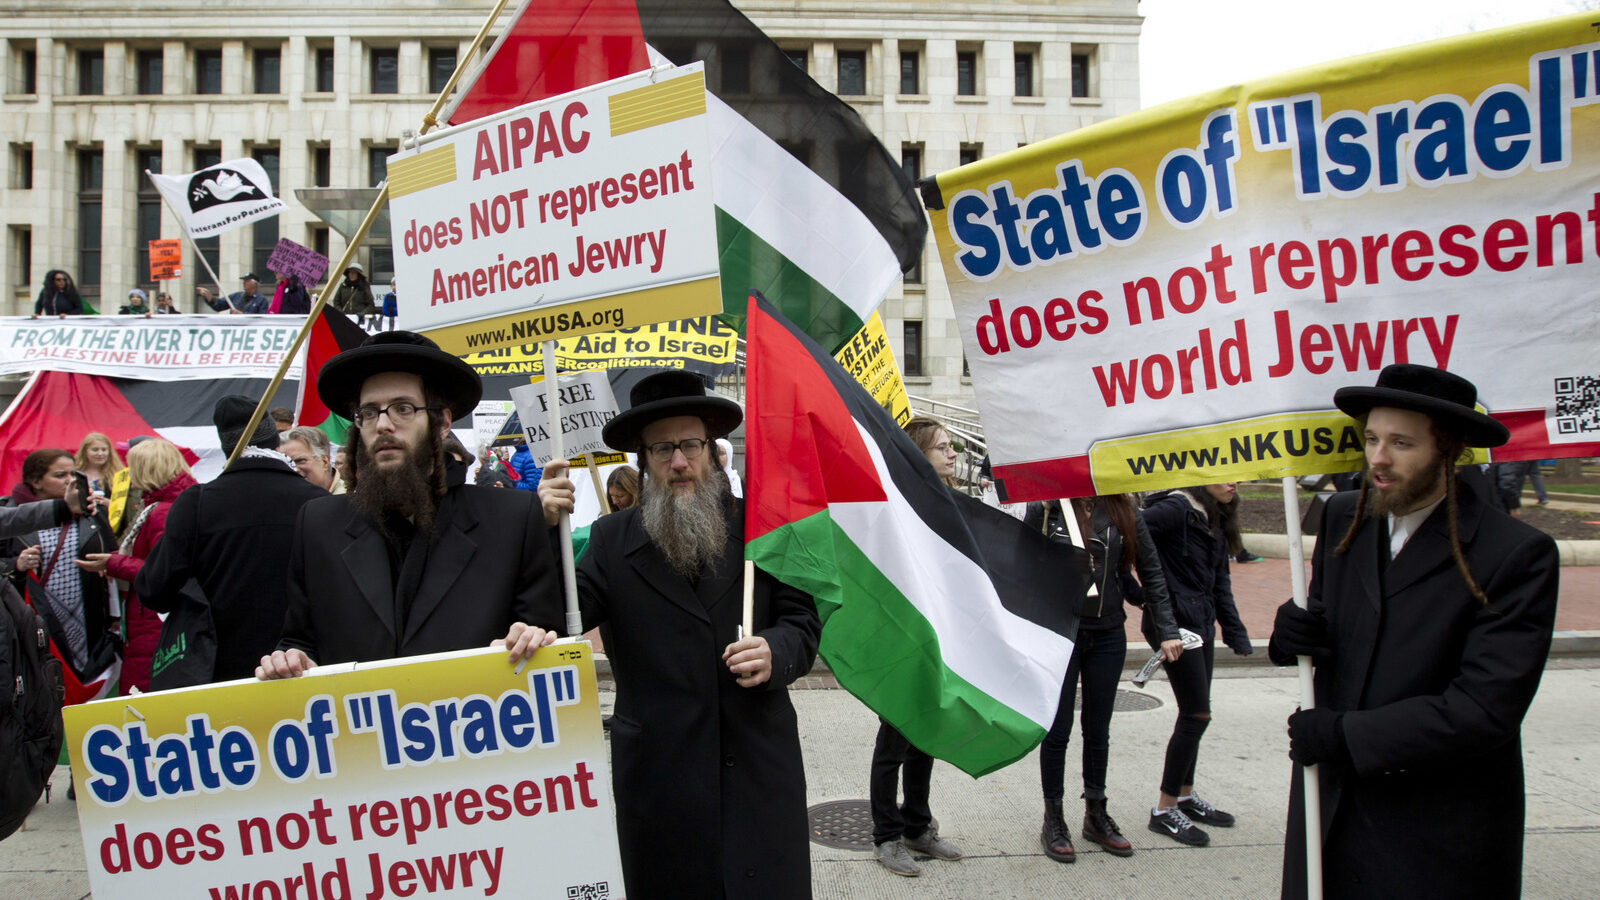 Rabbi Dovid Feldman, center, along with others protest outside of the Washington Convention Center where the 2017 AIPAC Policy Conference is taking, during a rally in Washington, Sunday, March 26, 2017. (AP/Jose Luis Magana)